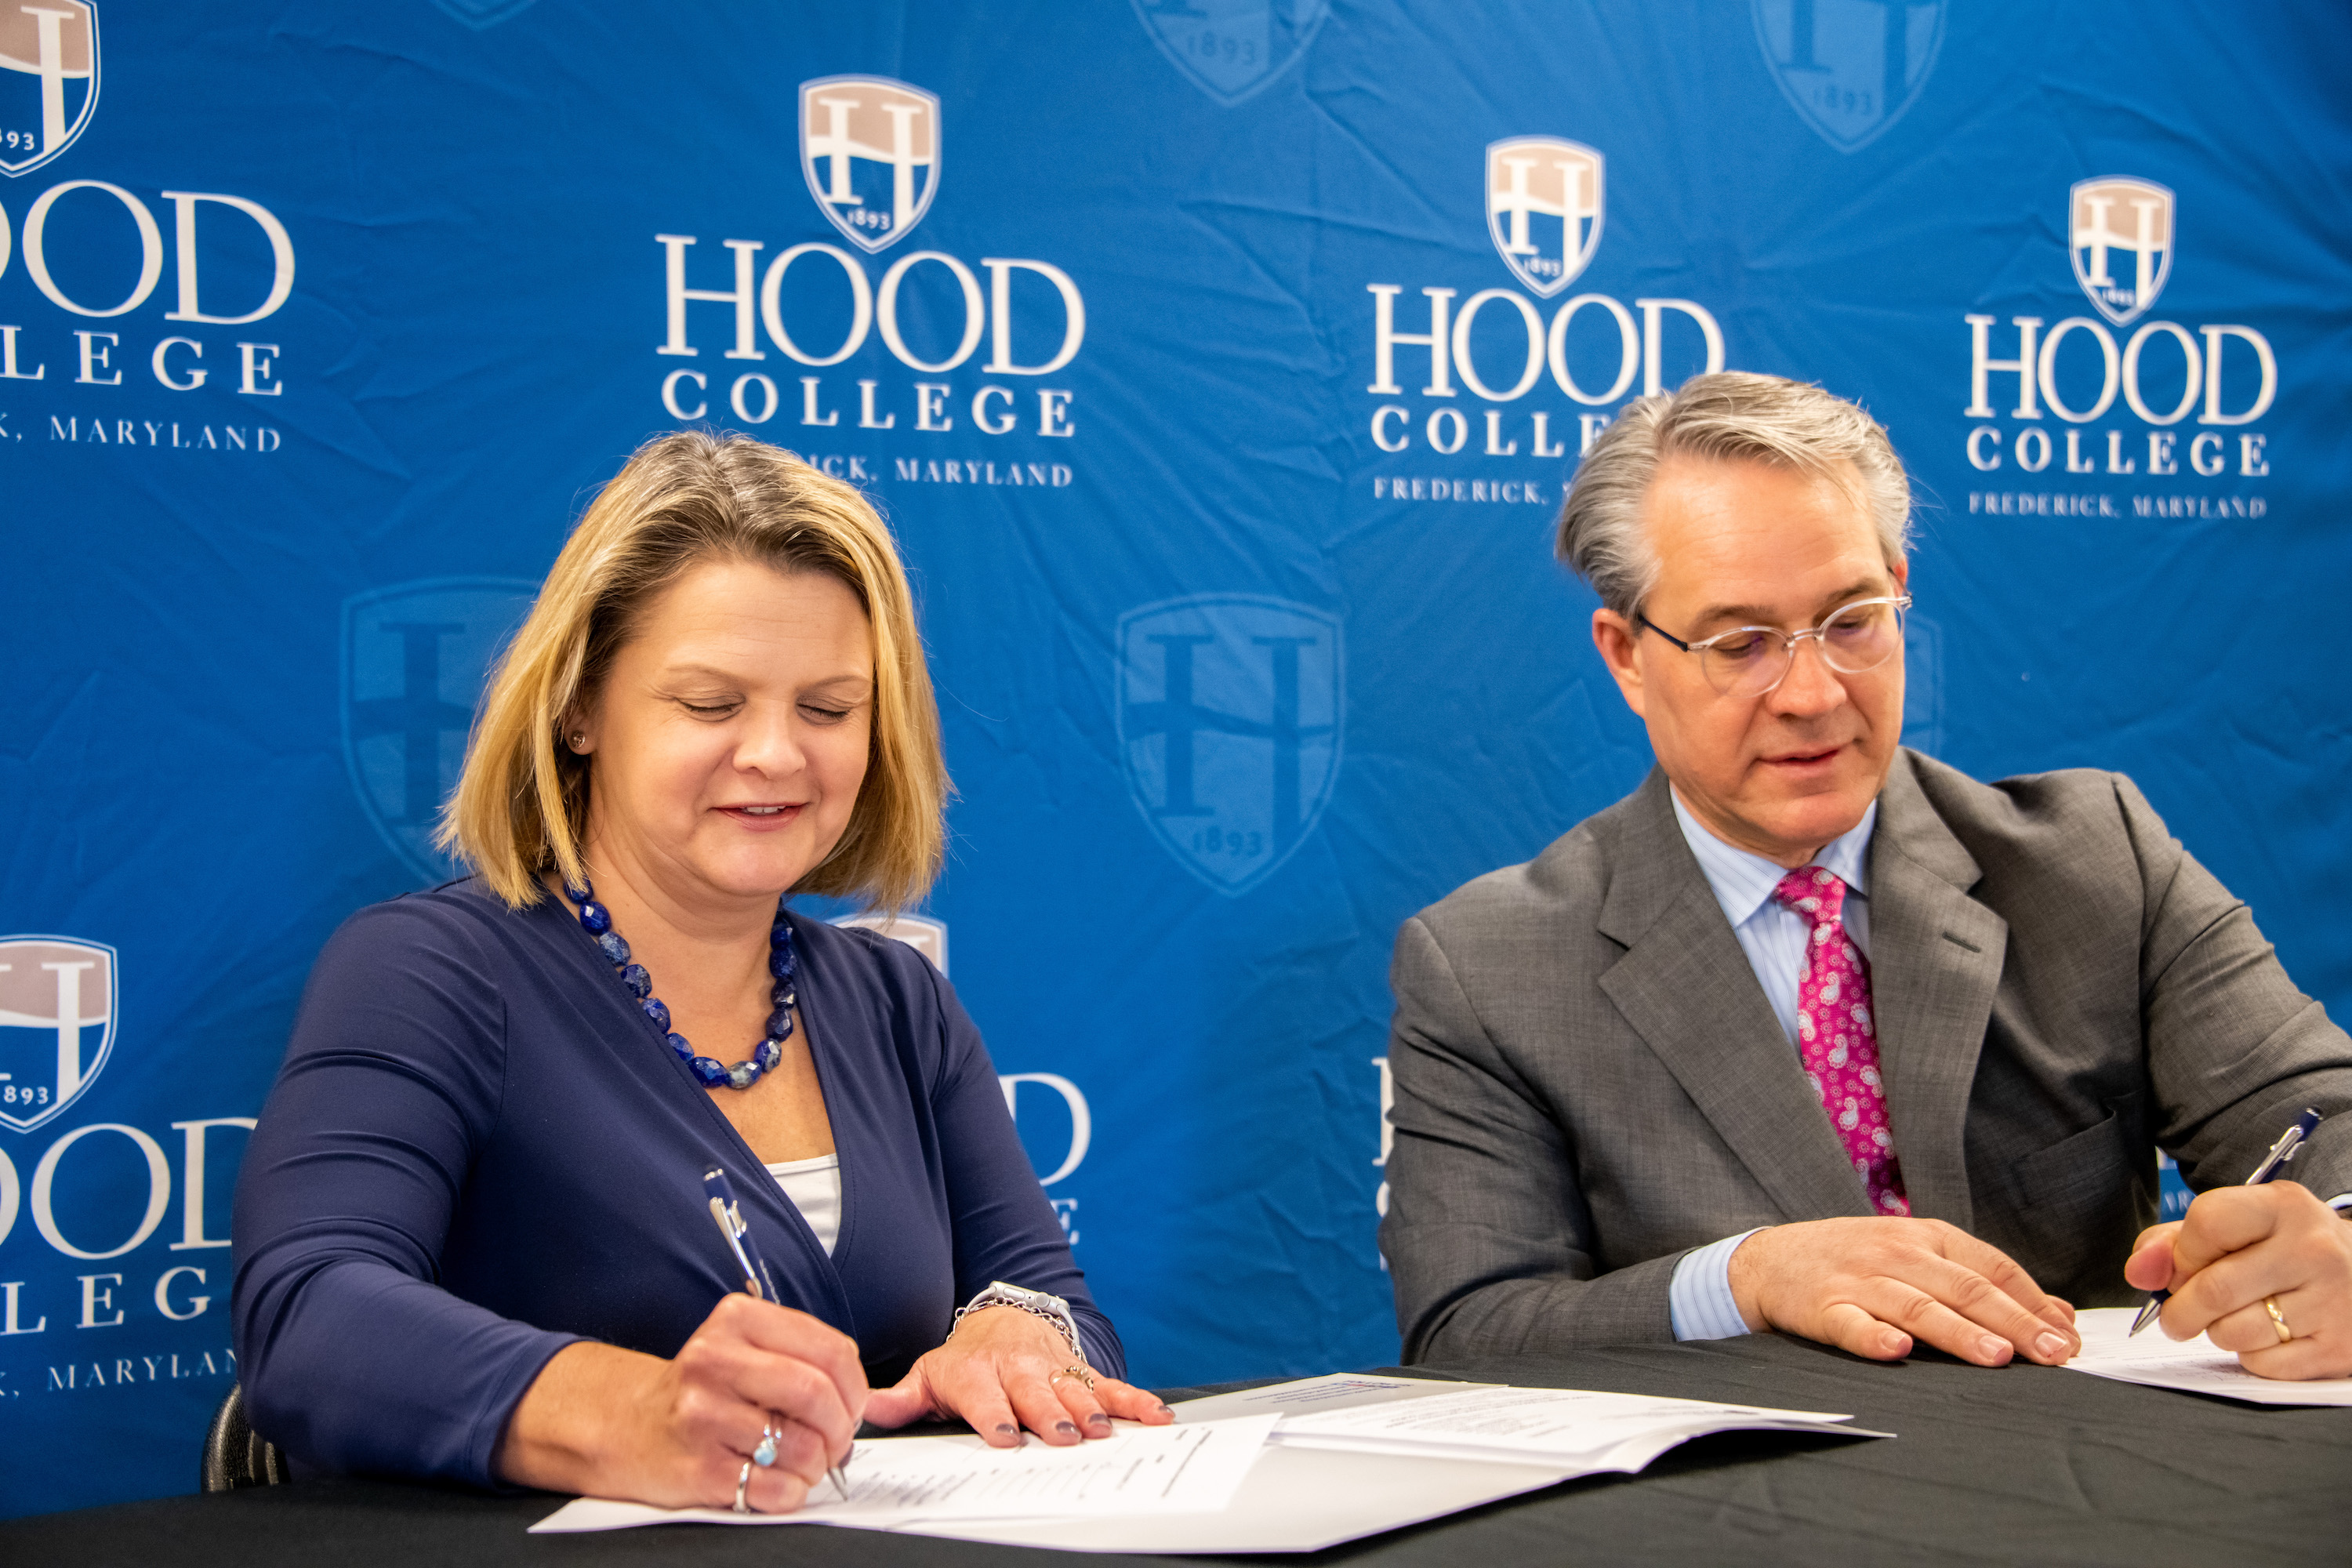 President Andrea Chapdelaine and CEO Tom Kleinhanzl sign a lease in front of a blue backdrop